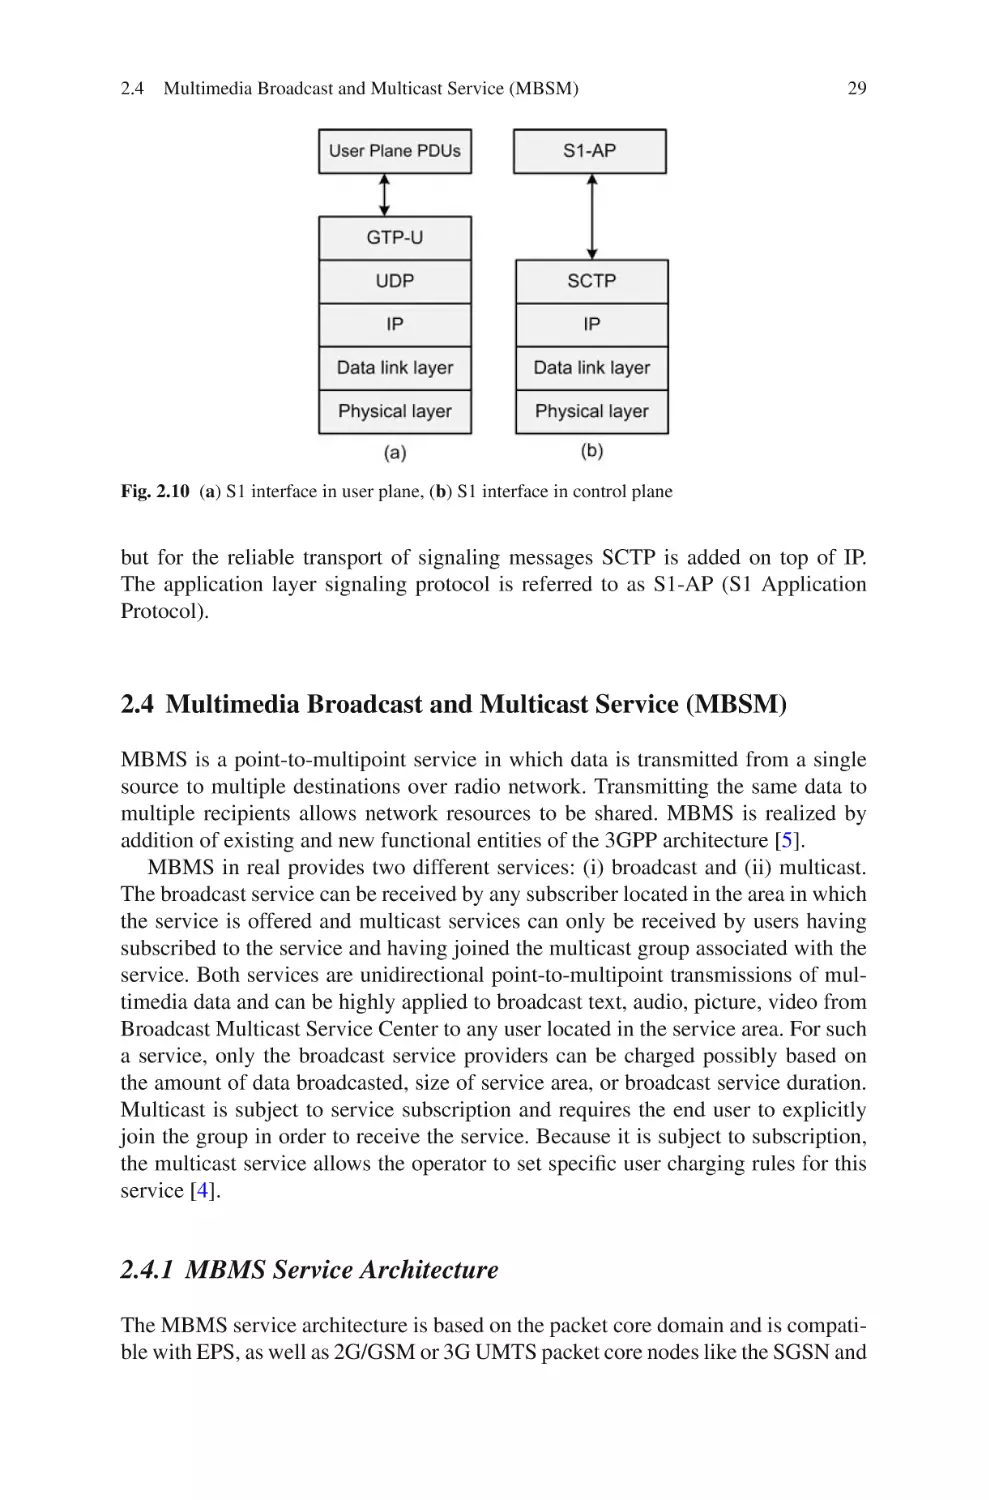 2.4  Multimedia Broadcast and Multicast Service (MBSM)
2.4.1  MBMS Service Architecture